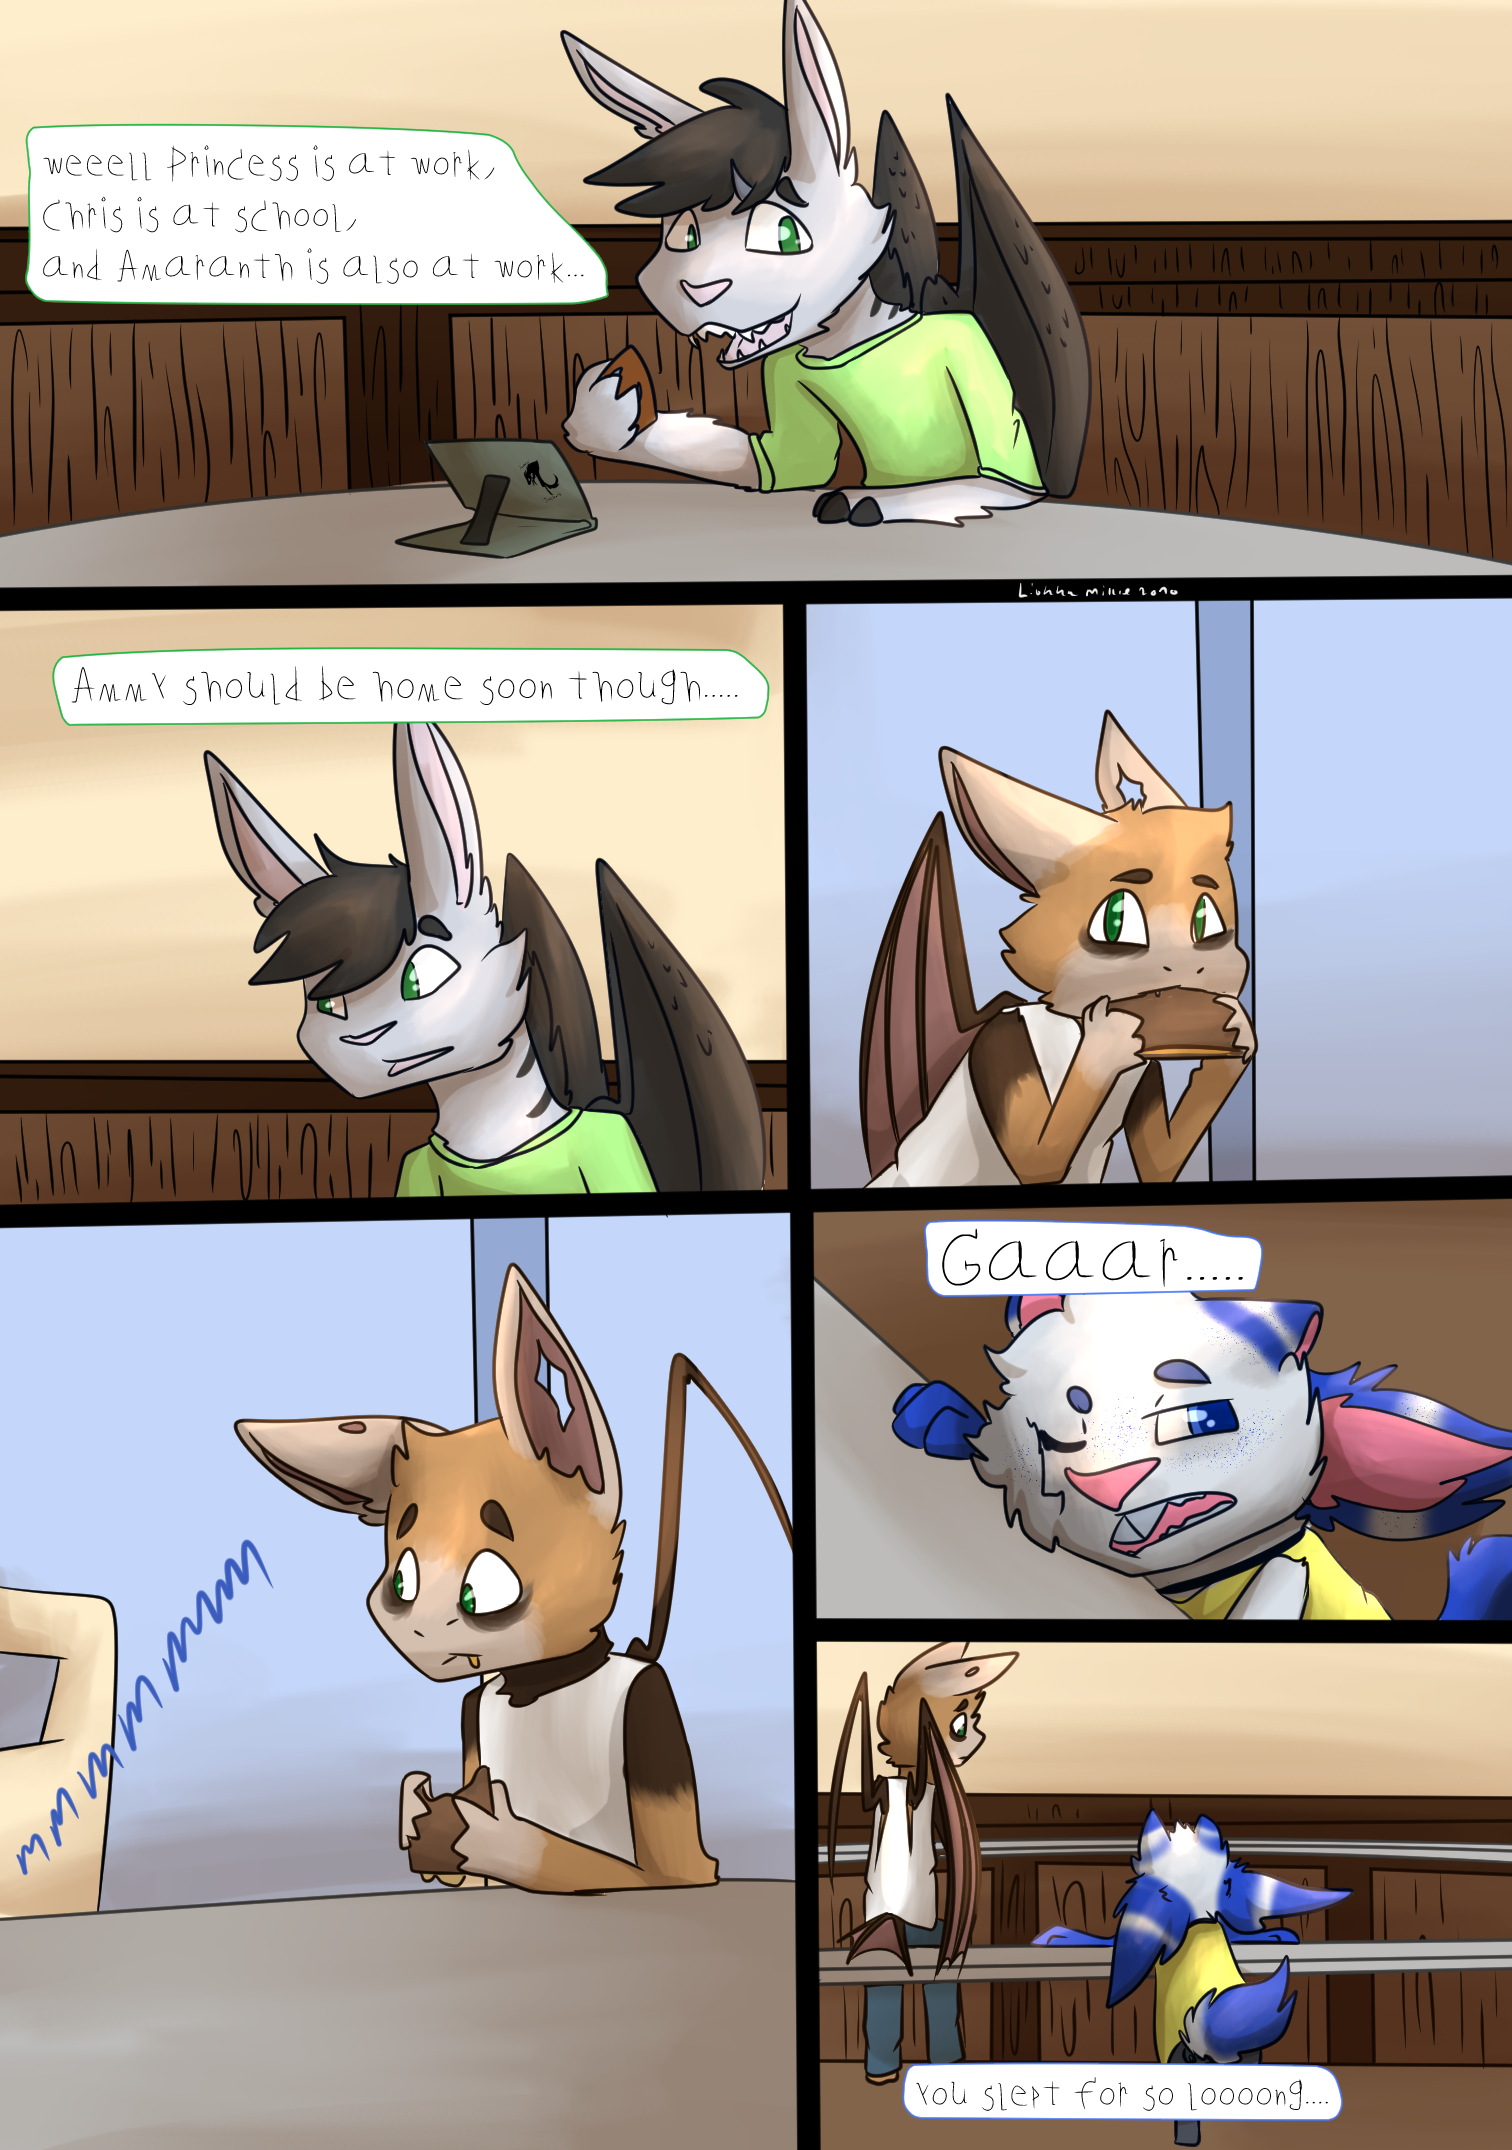 Page 21 - So long